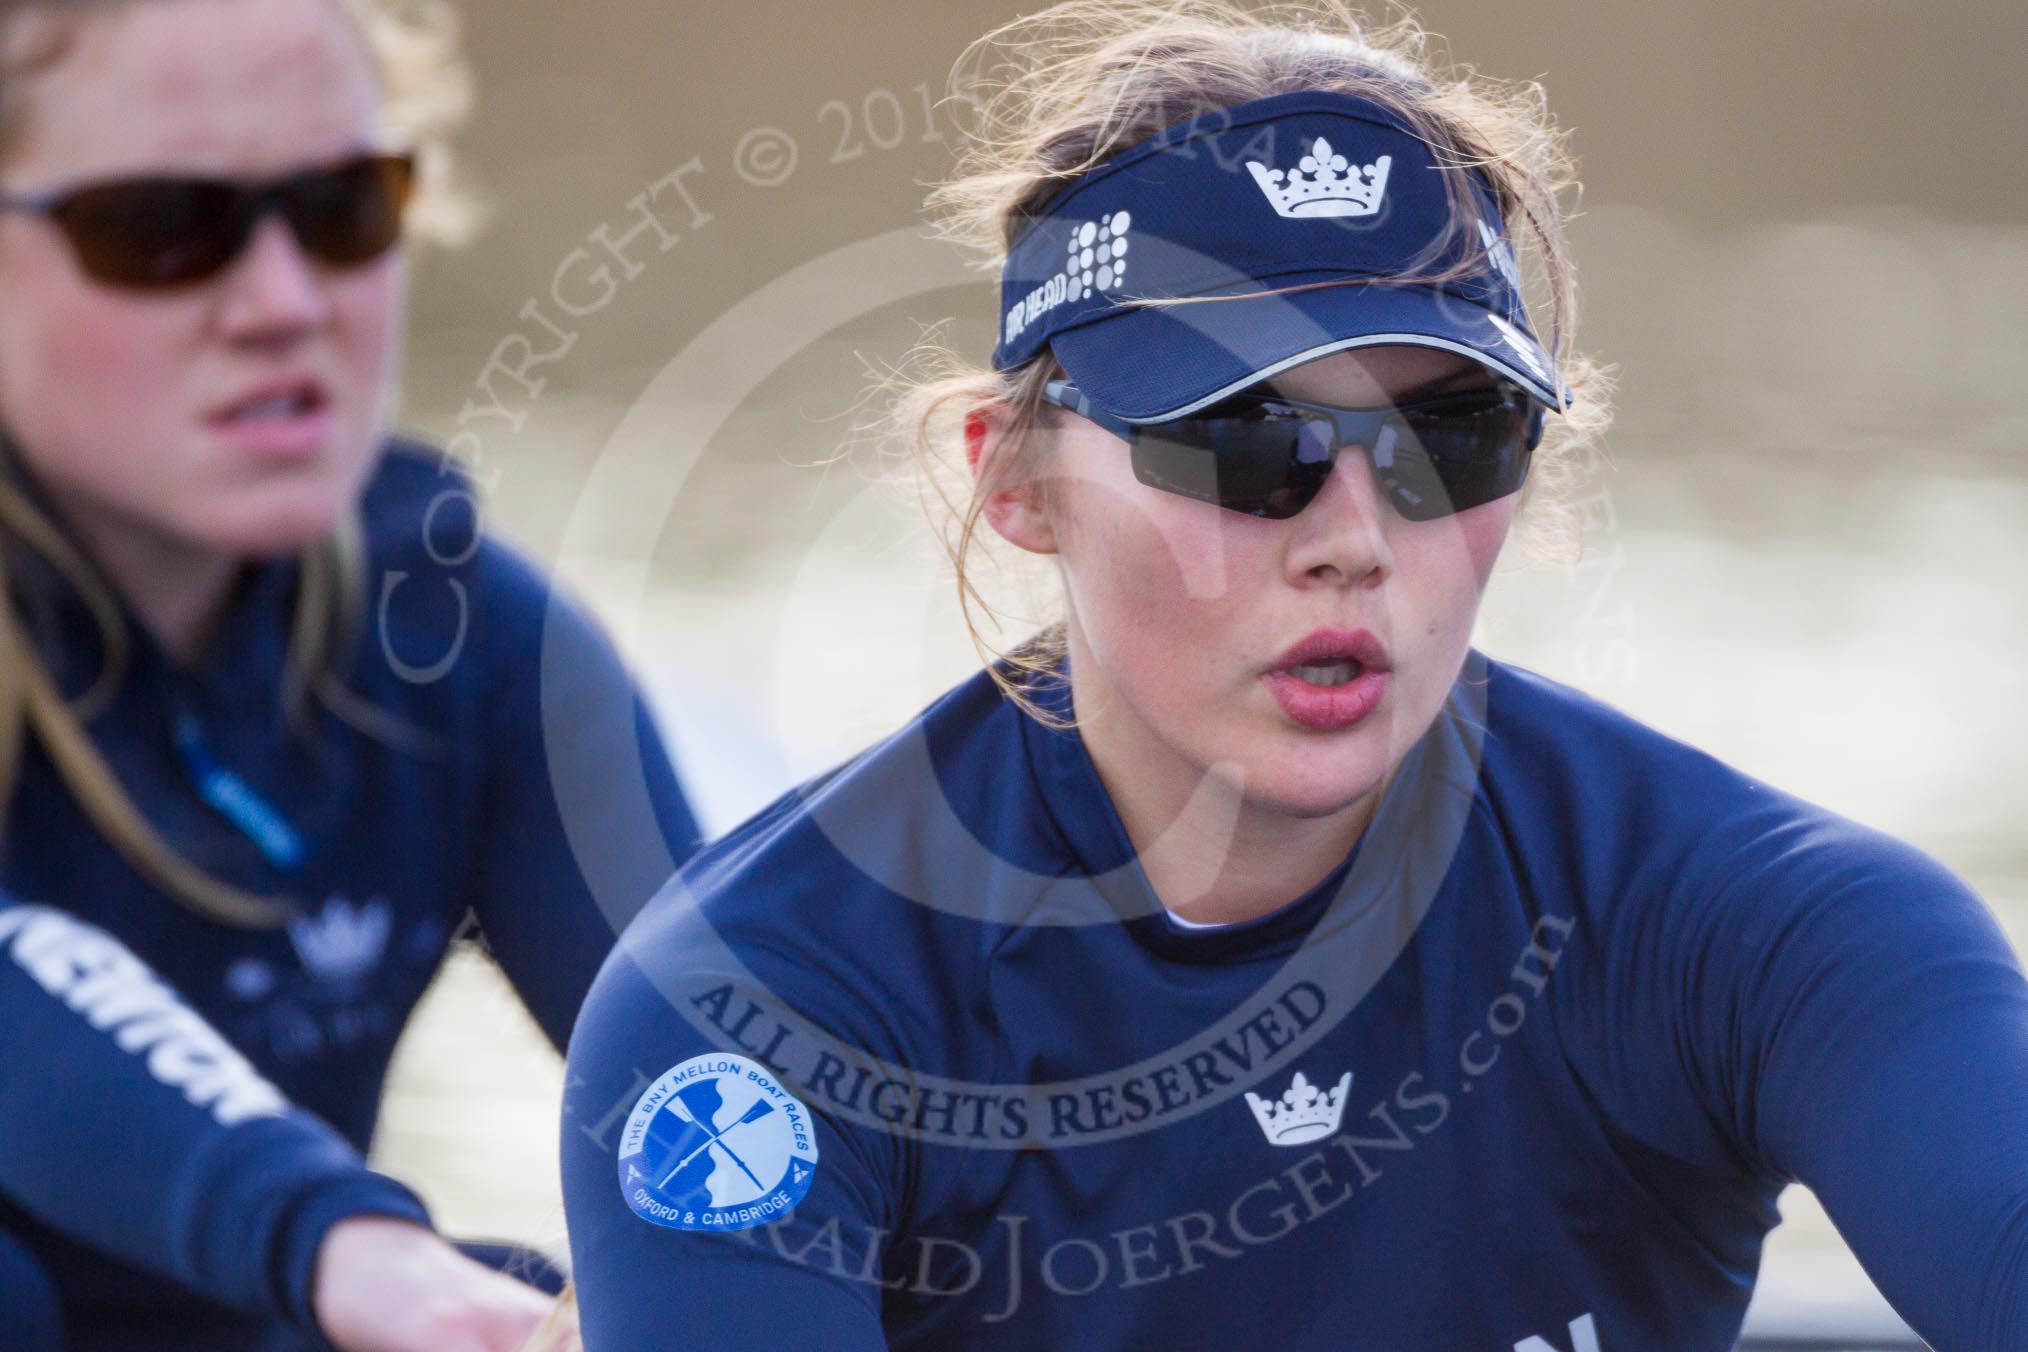 The Boat Race season 2015: OUWBC training Wallingford.

Wallingford,

United Kingdom,
on 04 March 2015 at 15:49, image #91